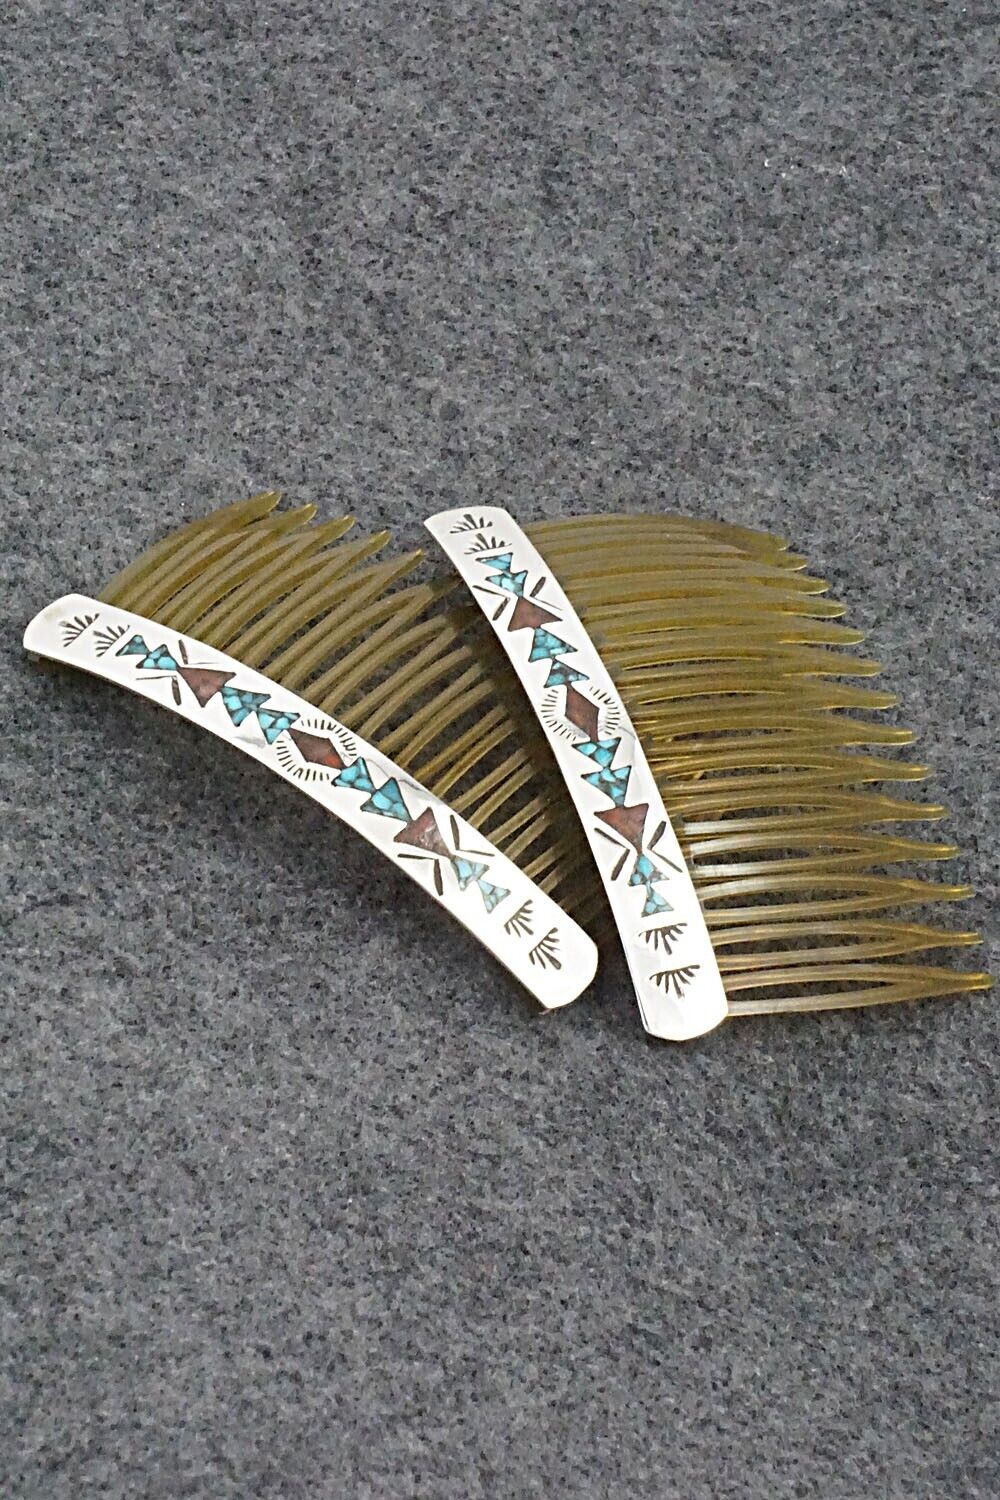 Turquoise, Coral & Sterling Silver Hair Combs - Jolene Yazzie